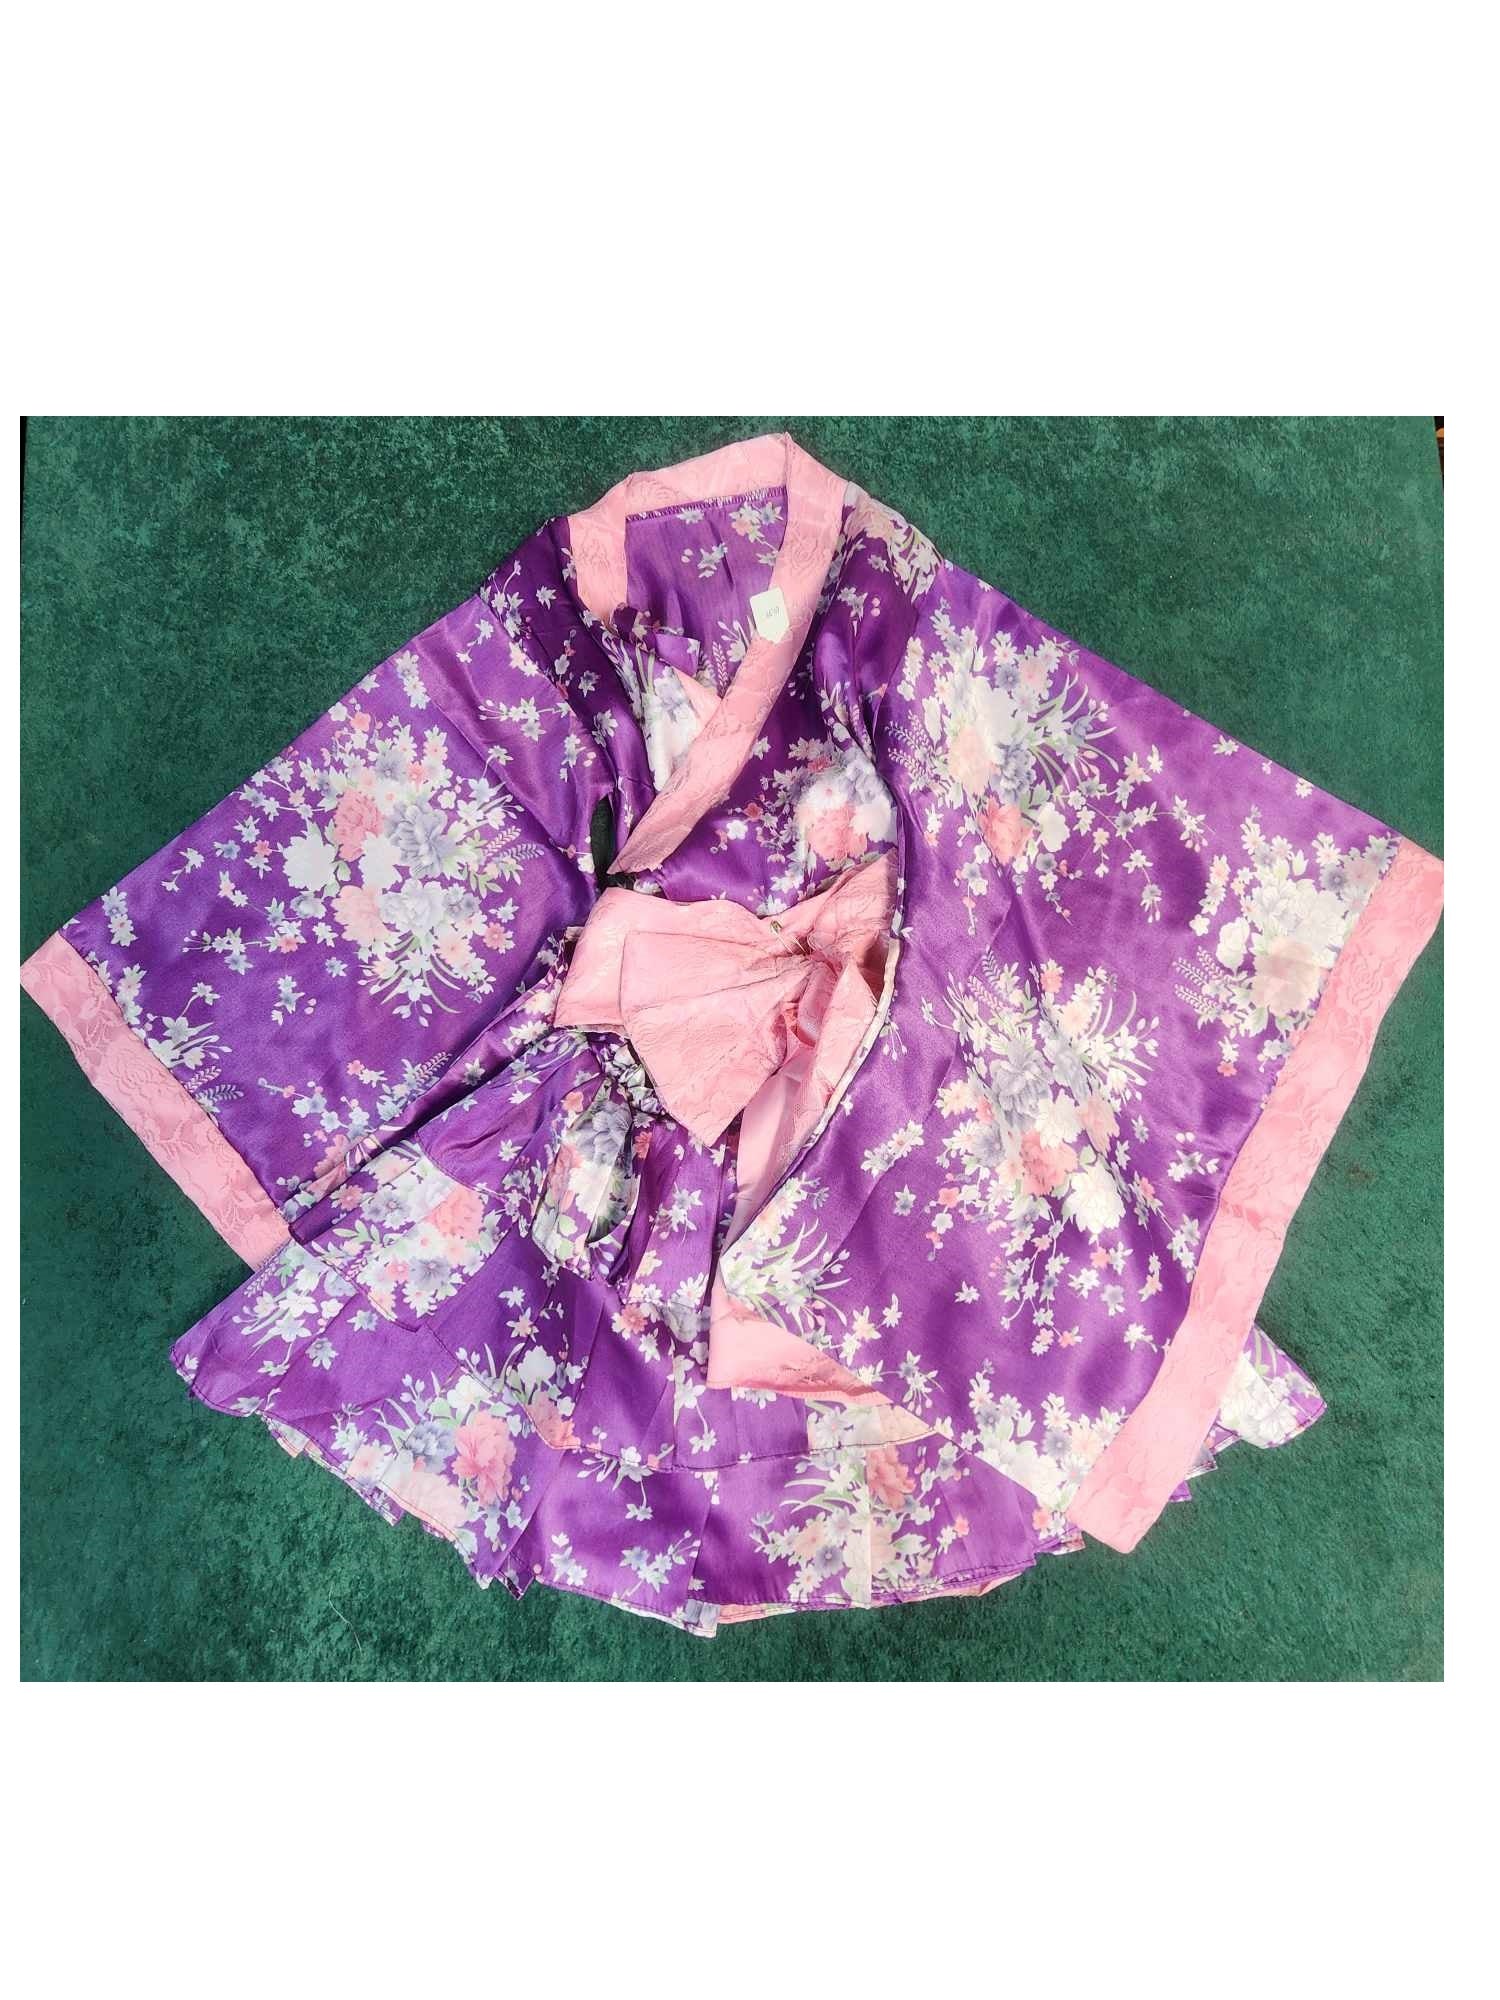 Purple kimono with pink lining that has a white, pink, and red flower print. A pink bow wraps the whole kimono together.